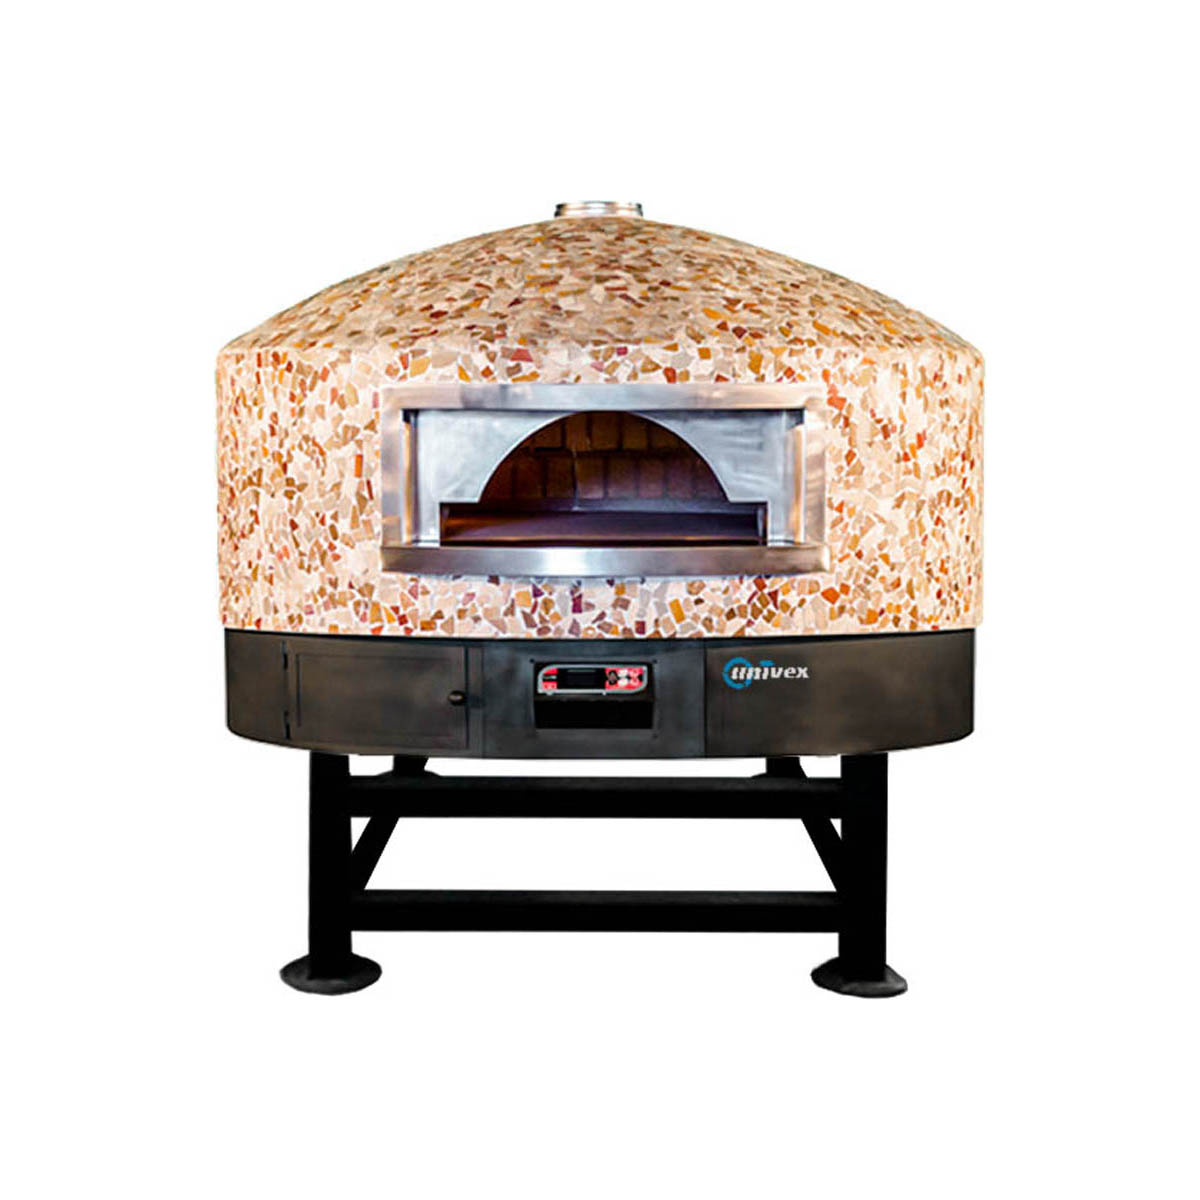 Univex DOME59RT Wood / Coal / Gas Fired Rotary Oven